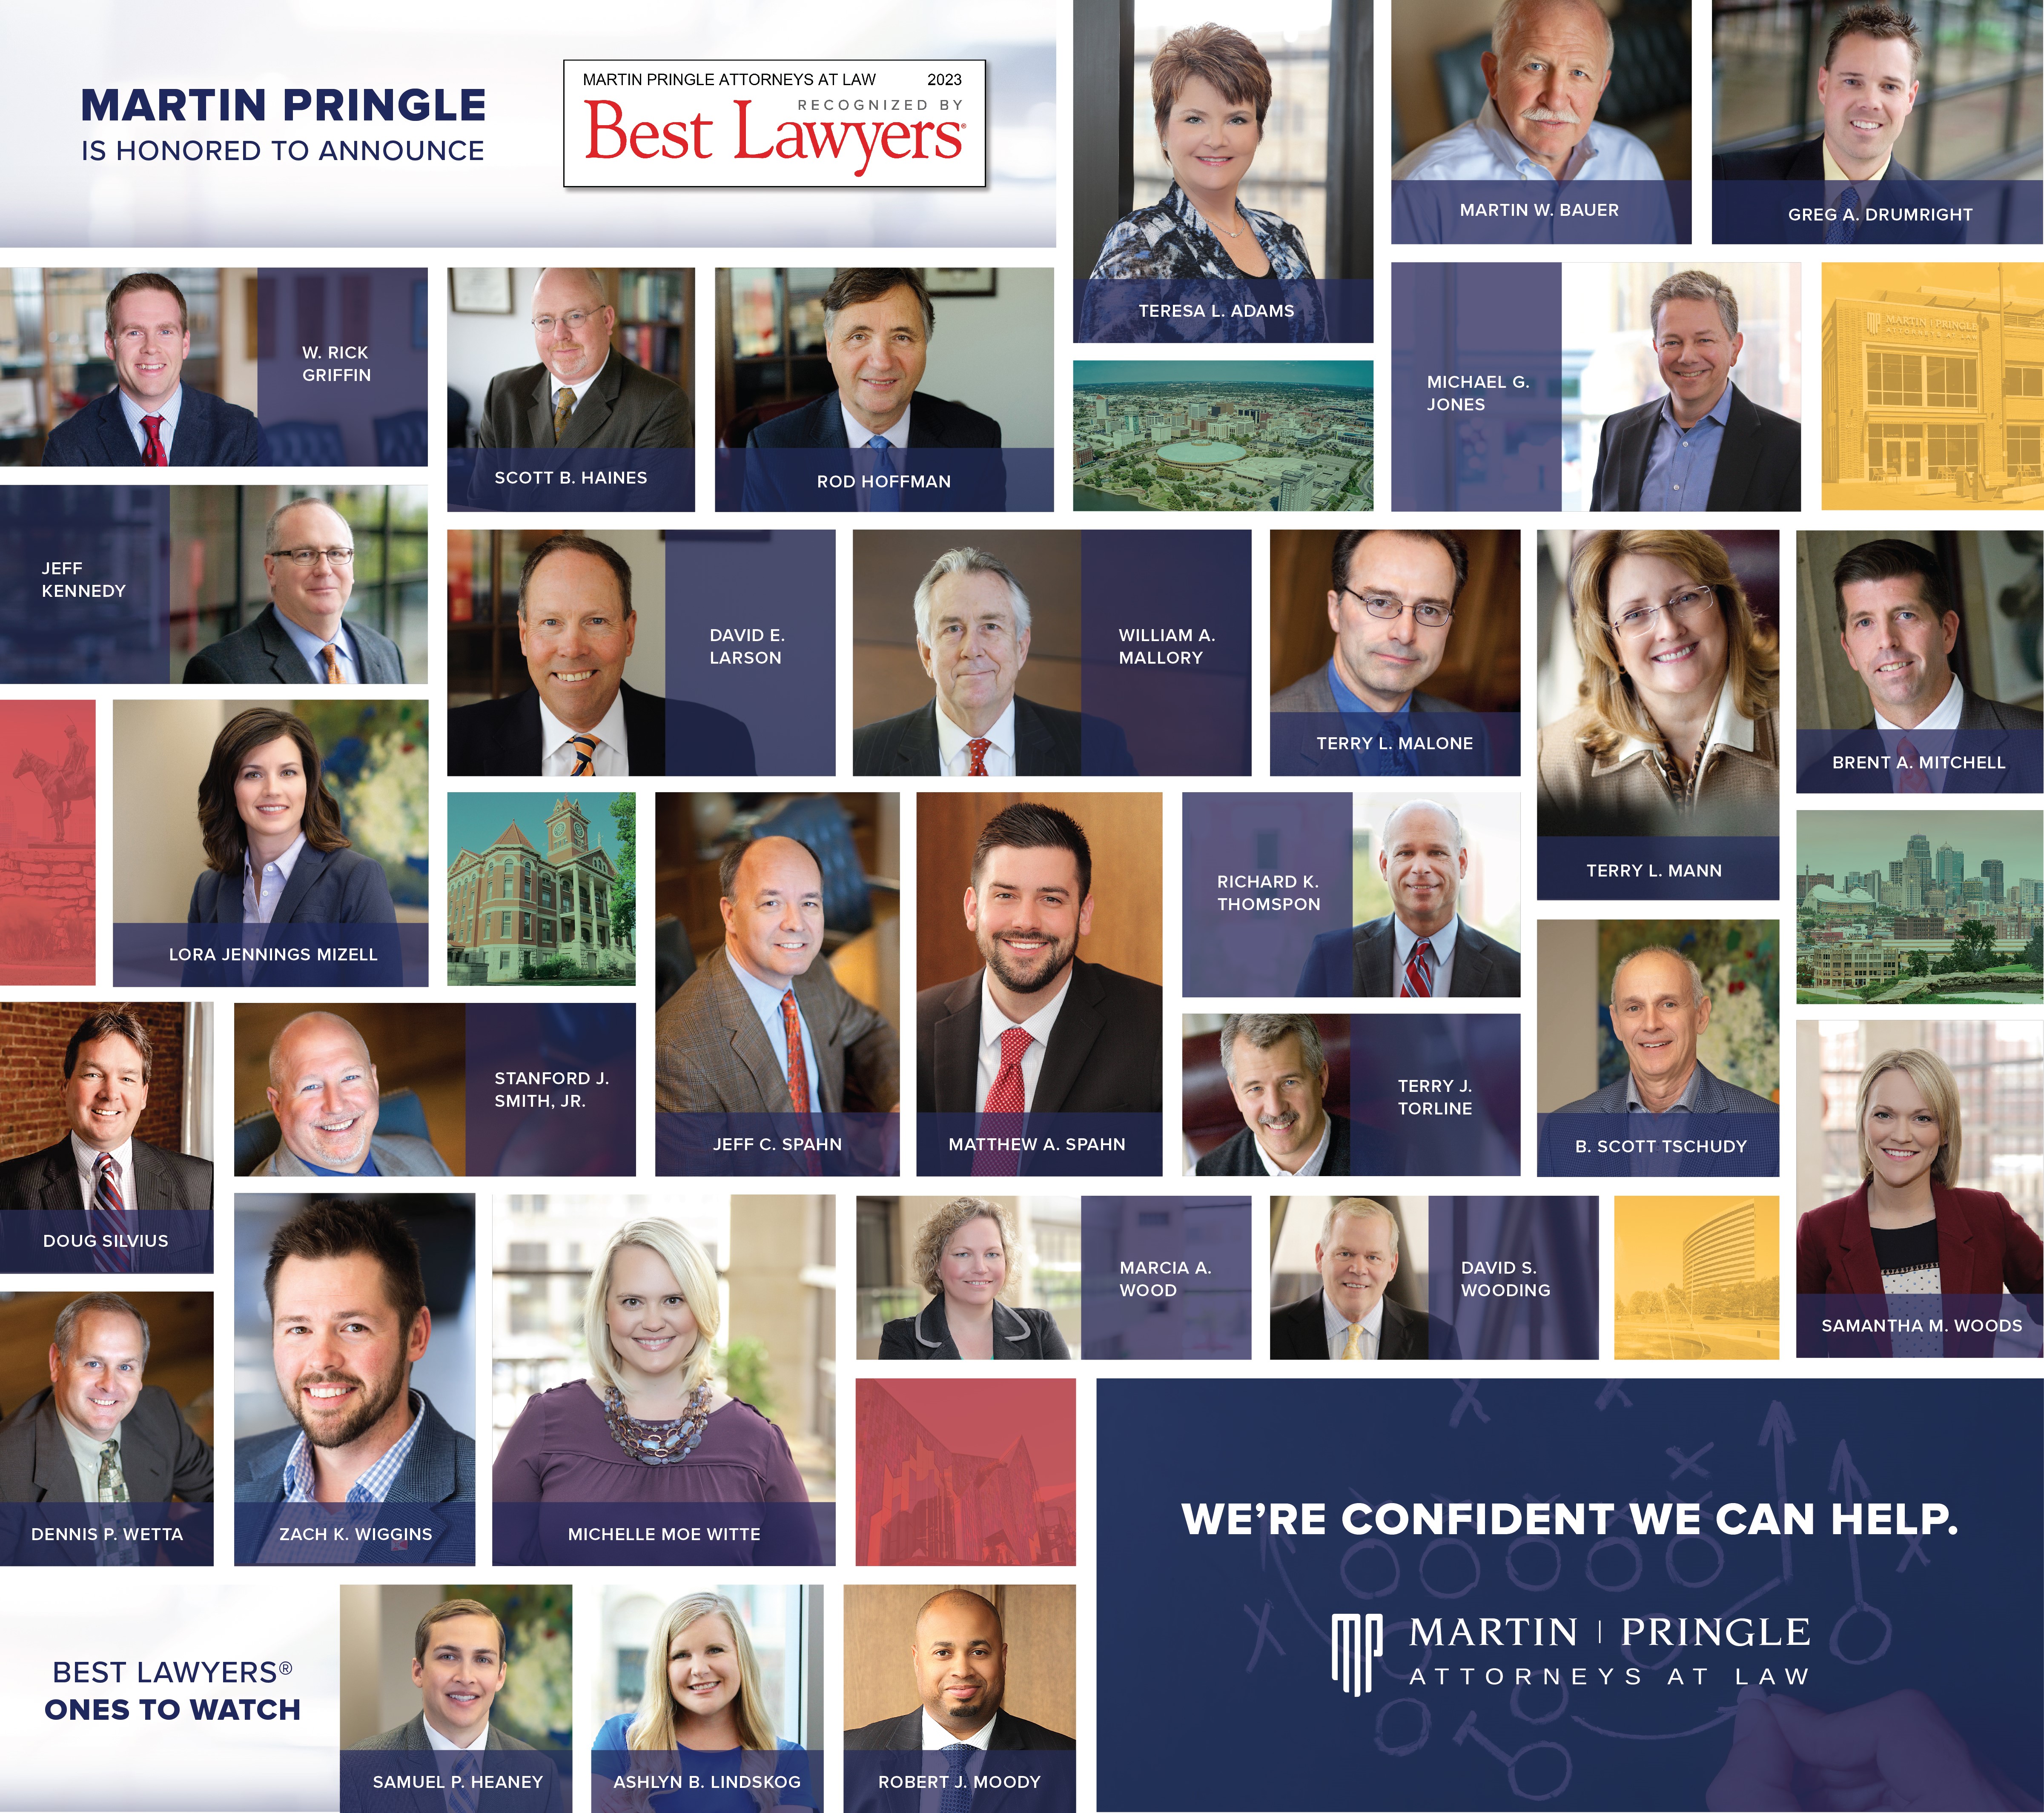 30 Martin Pringle Attorneys Recognized as Best Lawyers in America by US News & World Report